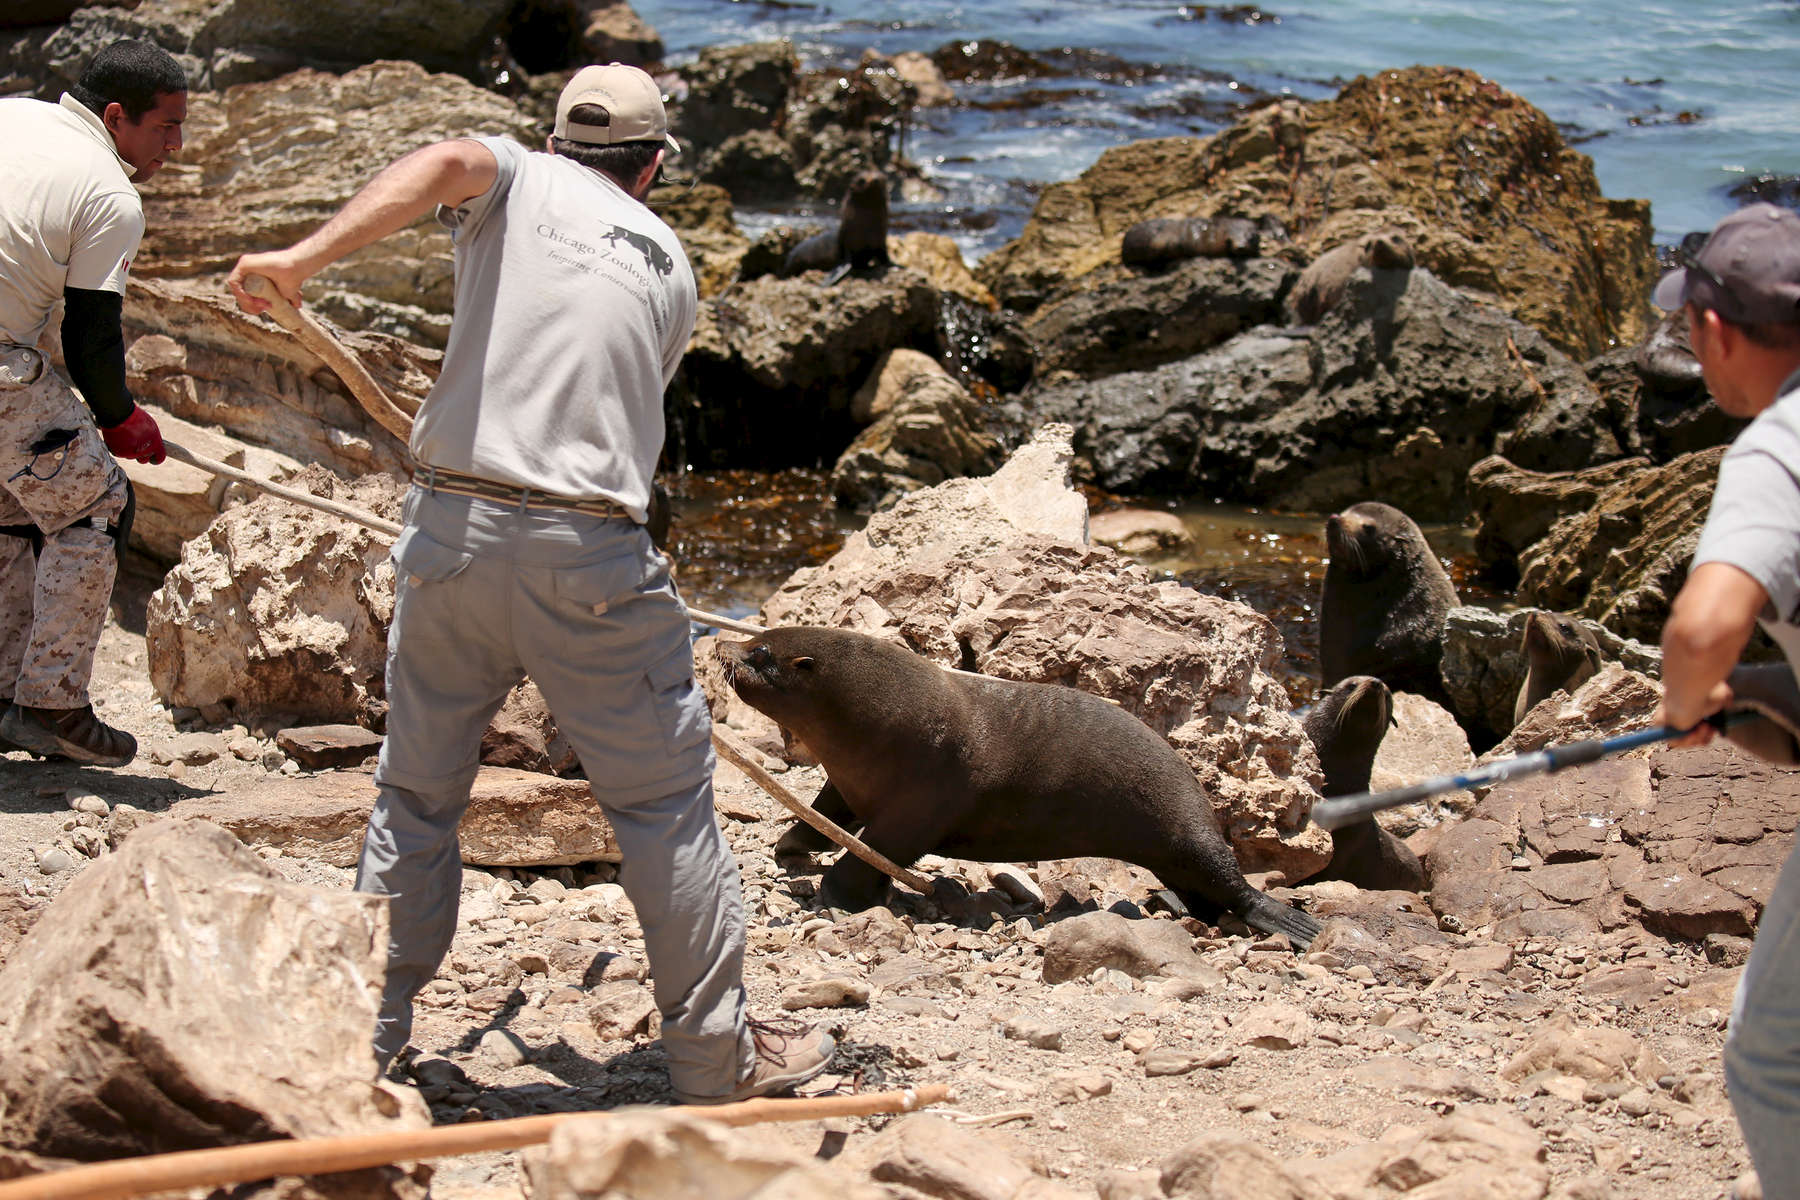 A team of animal care professionals from several organizations including the Brookfield Zoo and St. Louis Zoo used wooden poles to fend off an aggressive Peruvian fur seal as they work to sedate others in the colony.